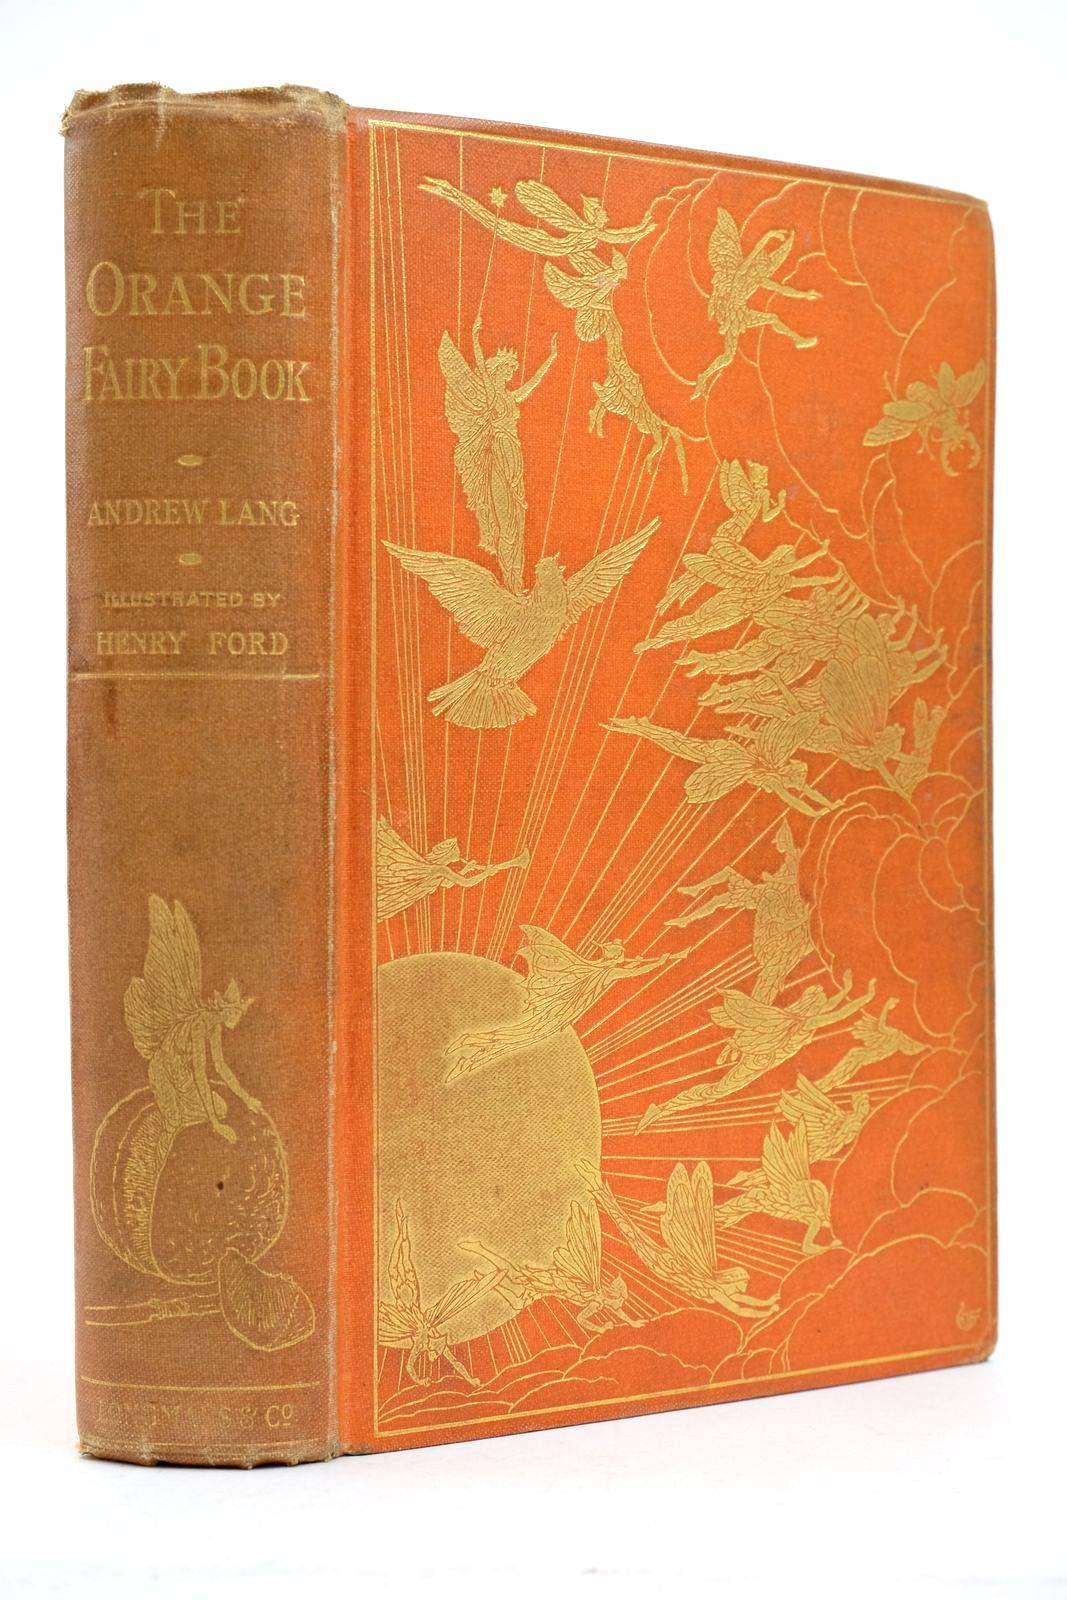 Photo of THE ORANGE FAIRY BOOK written by Lang, Andrew illustrated by Ford, H.J. published by Longmans, Green & Co. (STOCK CODE: 2139751)  for sale by Stella & Rose's Books